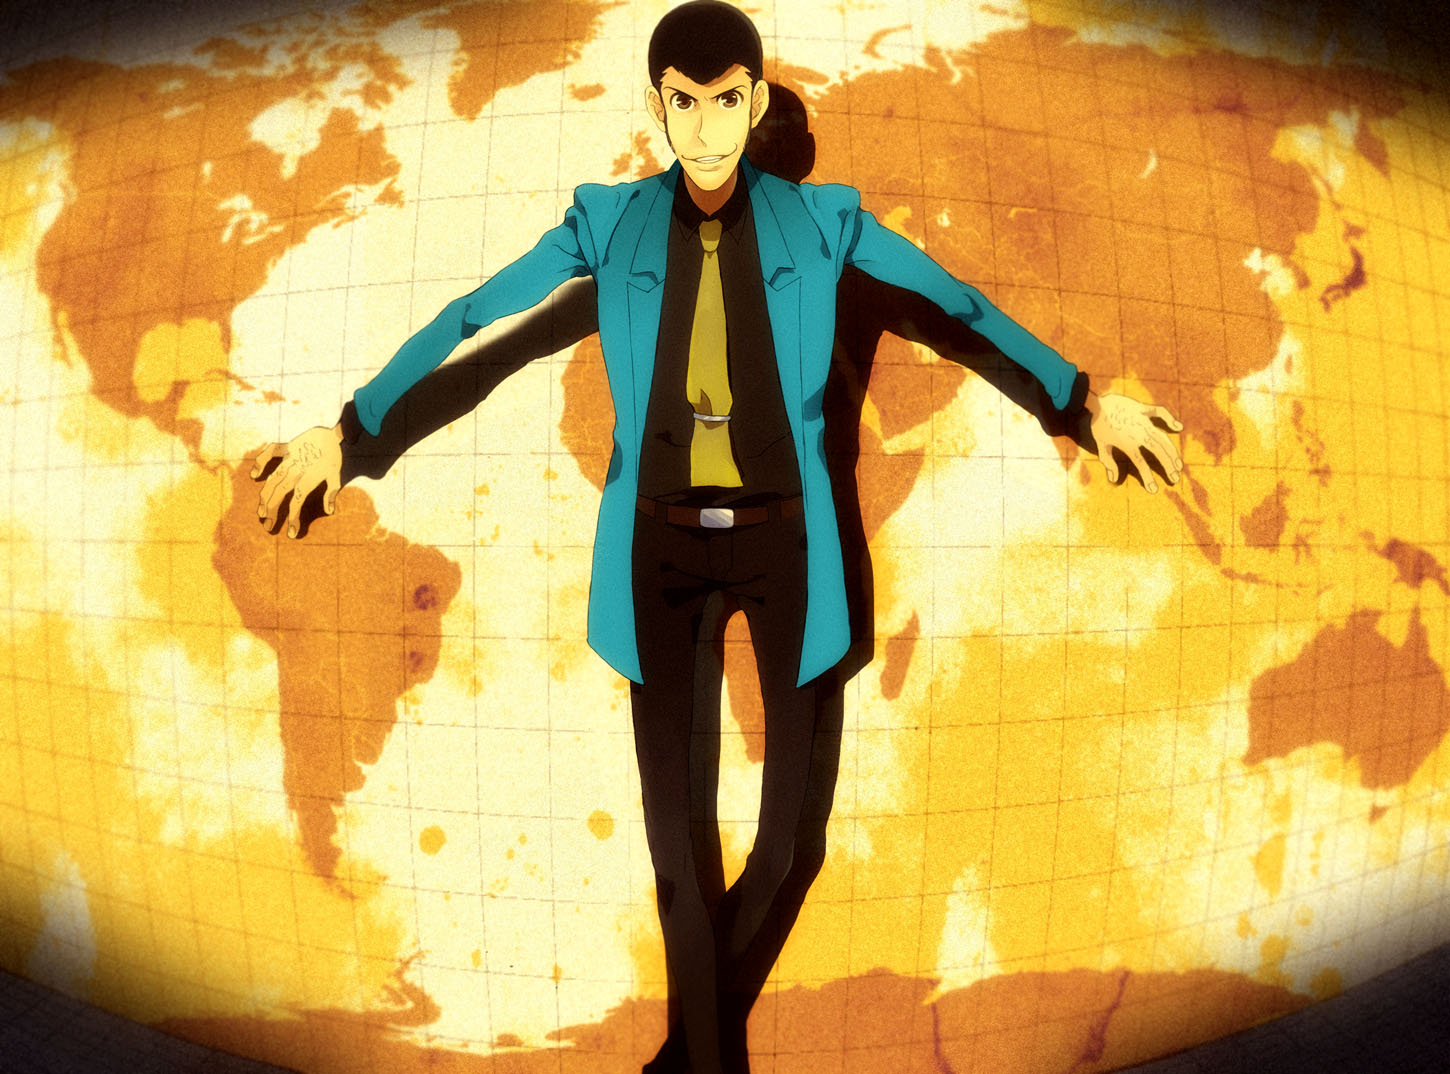 Lupin The 3rd Wallpaper Anime Hq Pictures